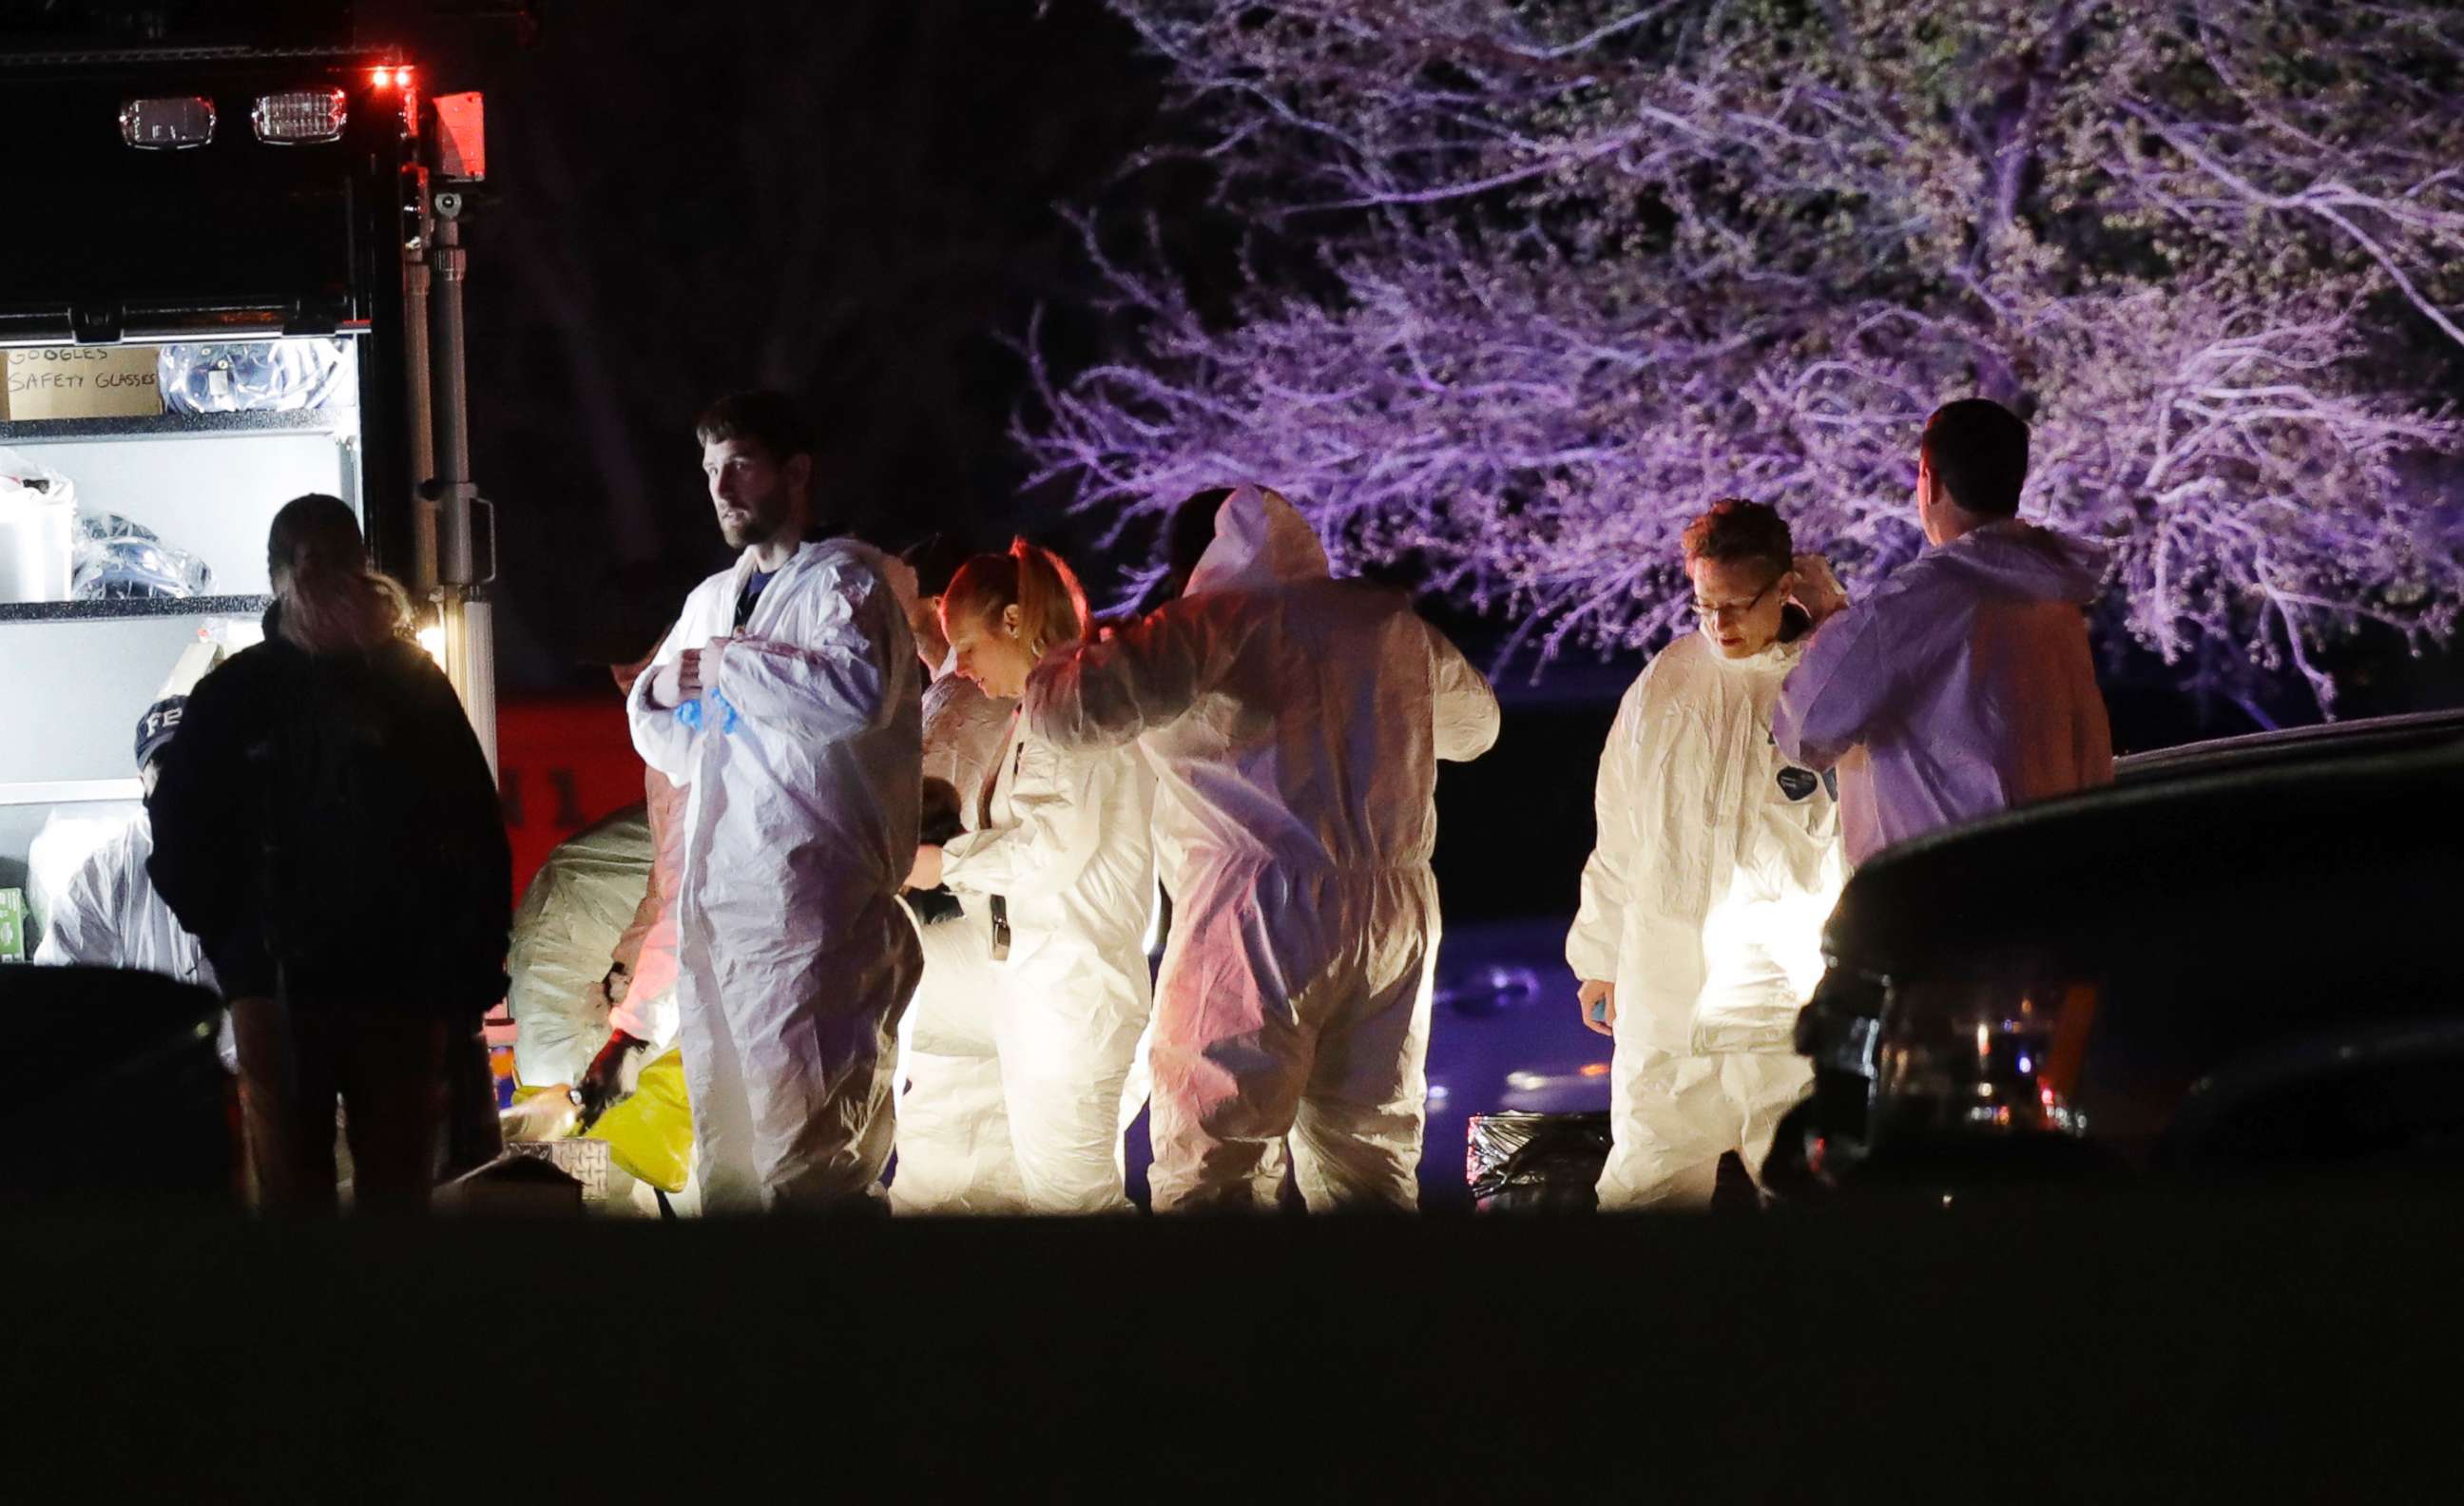 PHOTO: Members of law enforcement work near the area where a suspect in a series of bombing attacks in Austin blew himself up as authorities closed in, March 21, 2018, in Round Rock, Texas.